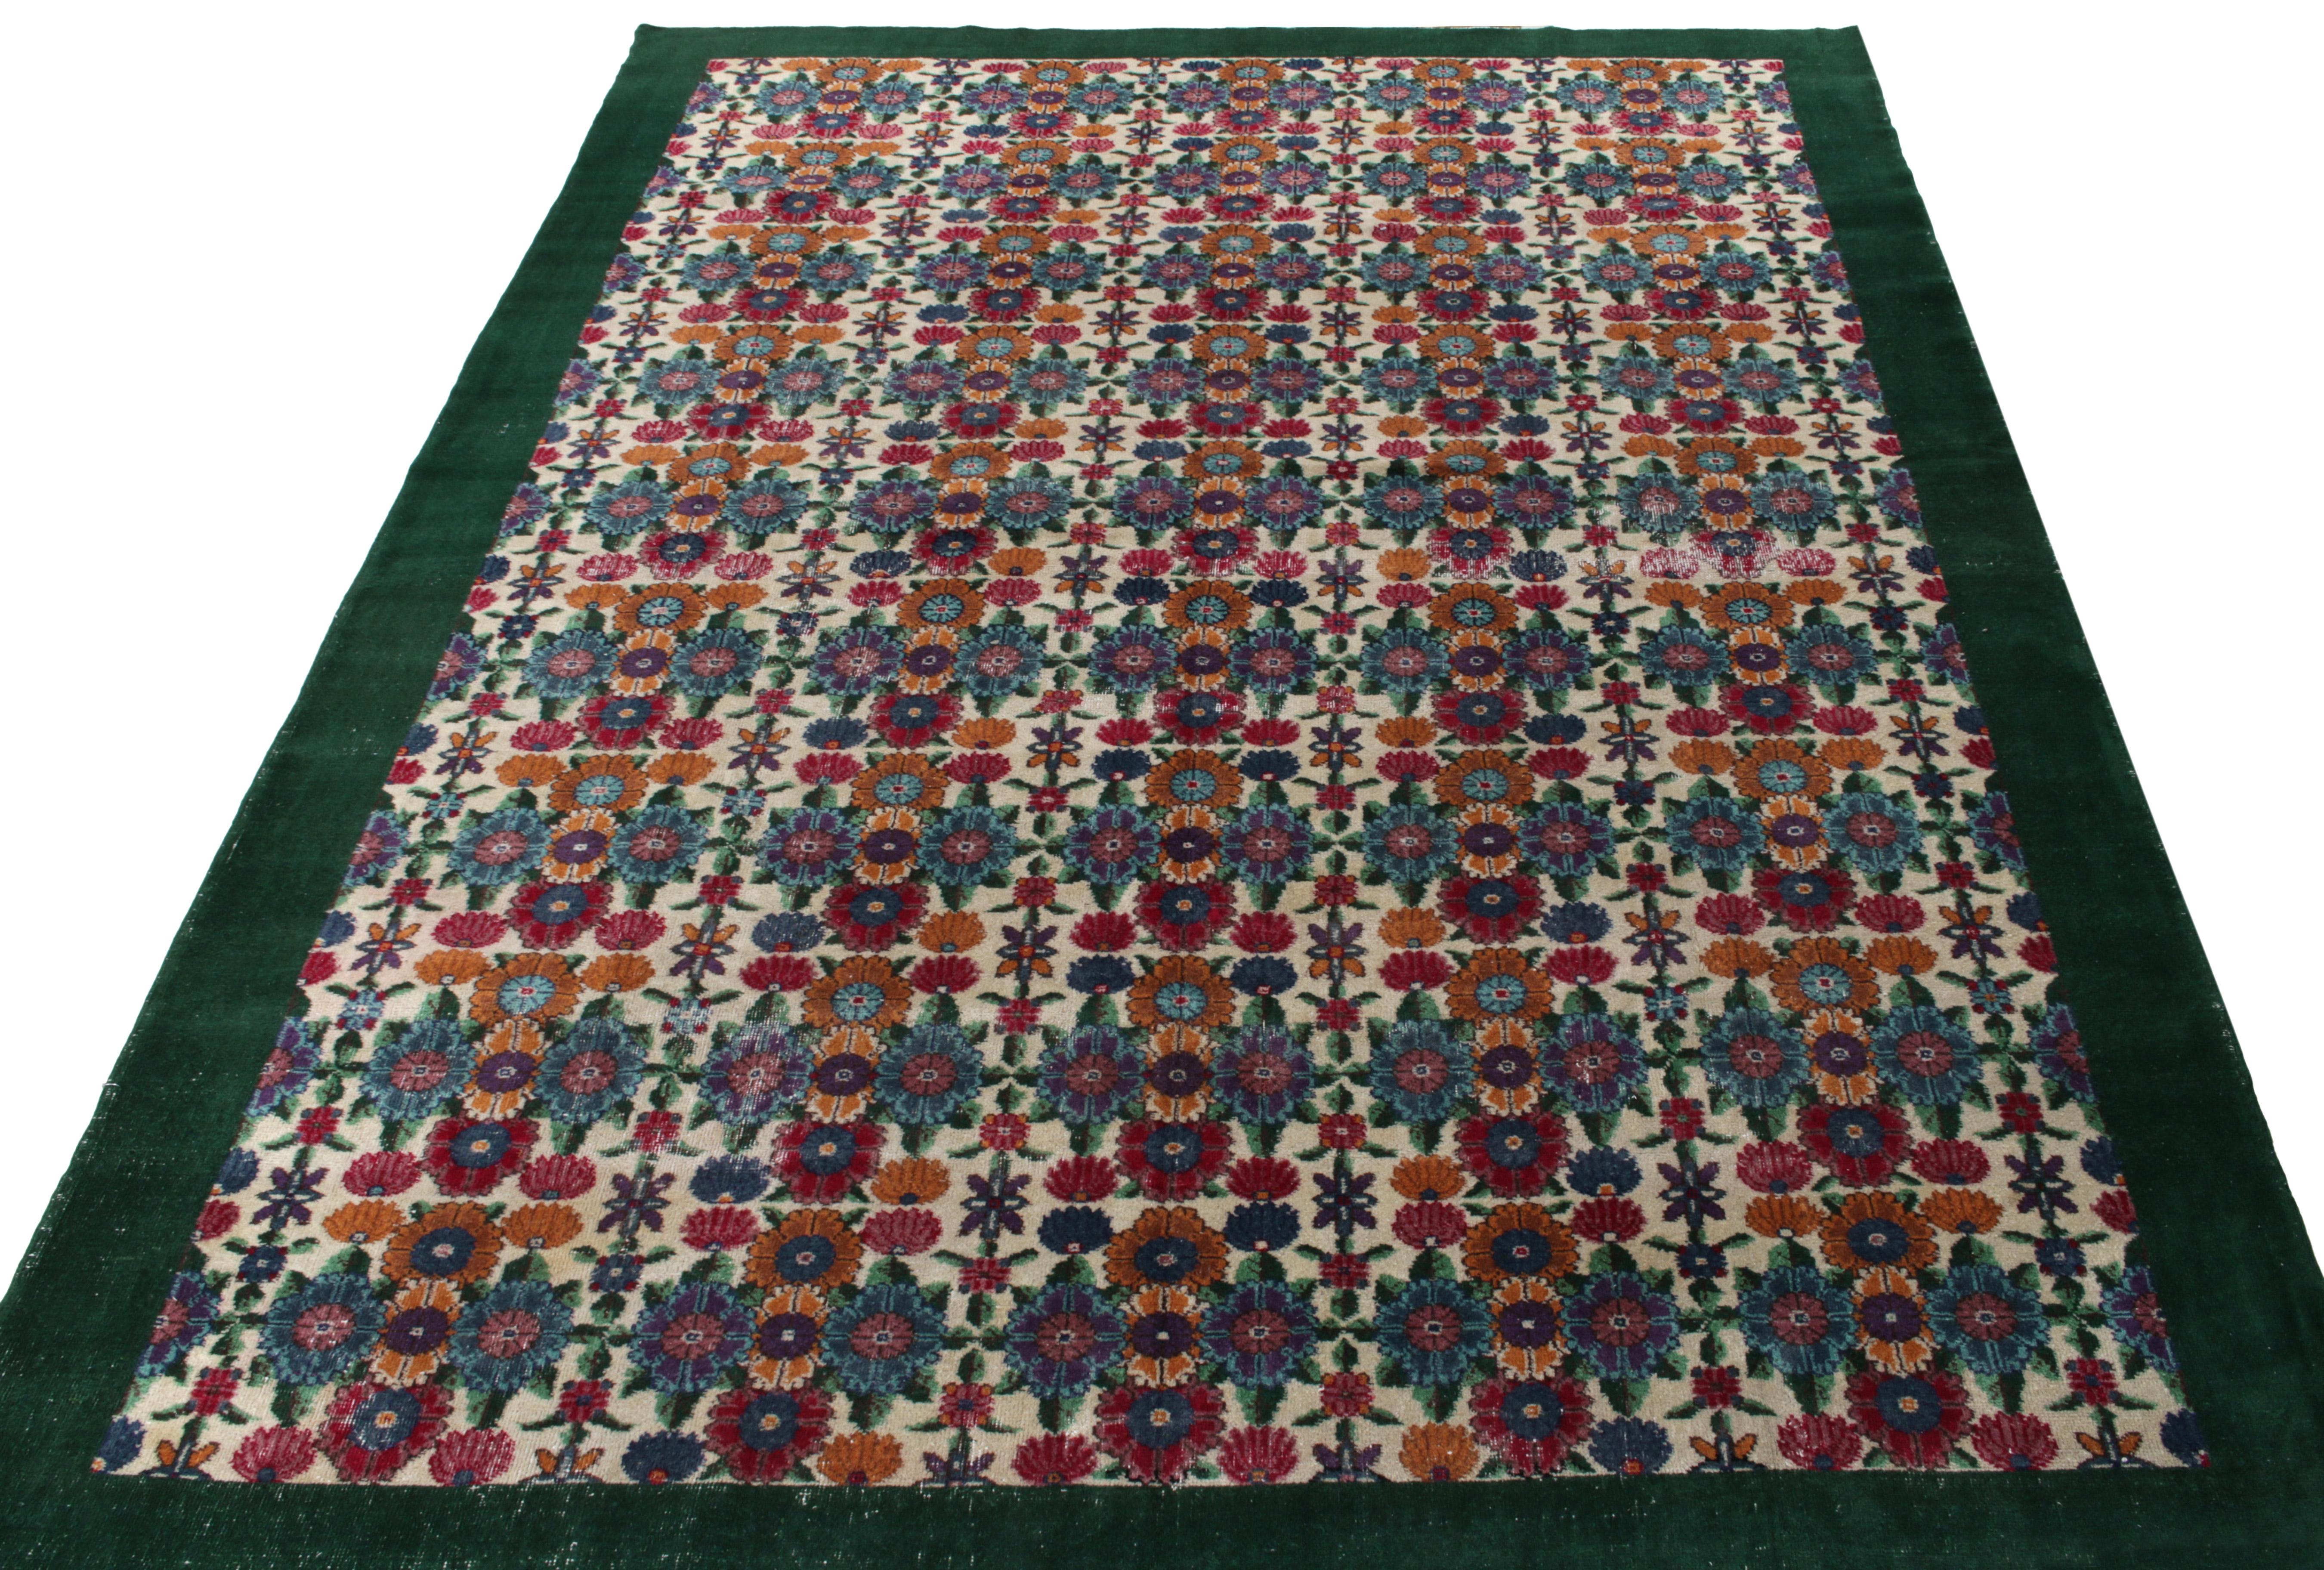 Originating from Turkey circa 1960-1970, an 8 x 12 vintage mid-century rug featuring a gorgeous floral pattern in aqua blue, golden-orange and maroon lovingly locked in a deep green border. From Rug & Kilim’s Mid-Century Pasha Collection,